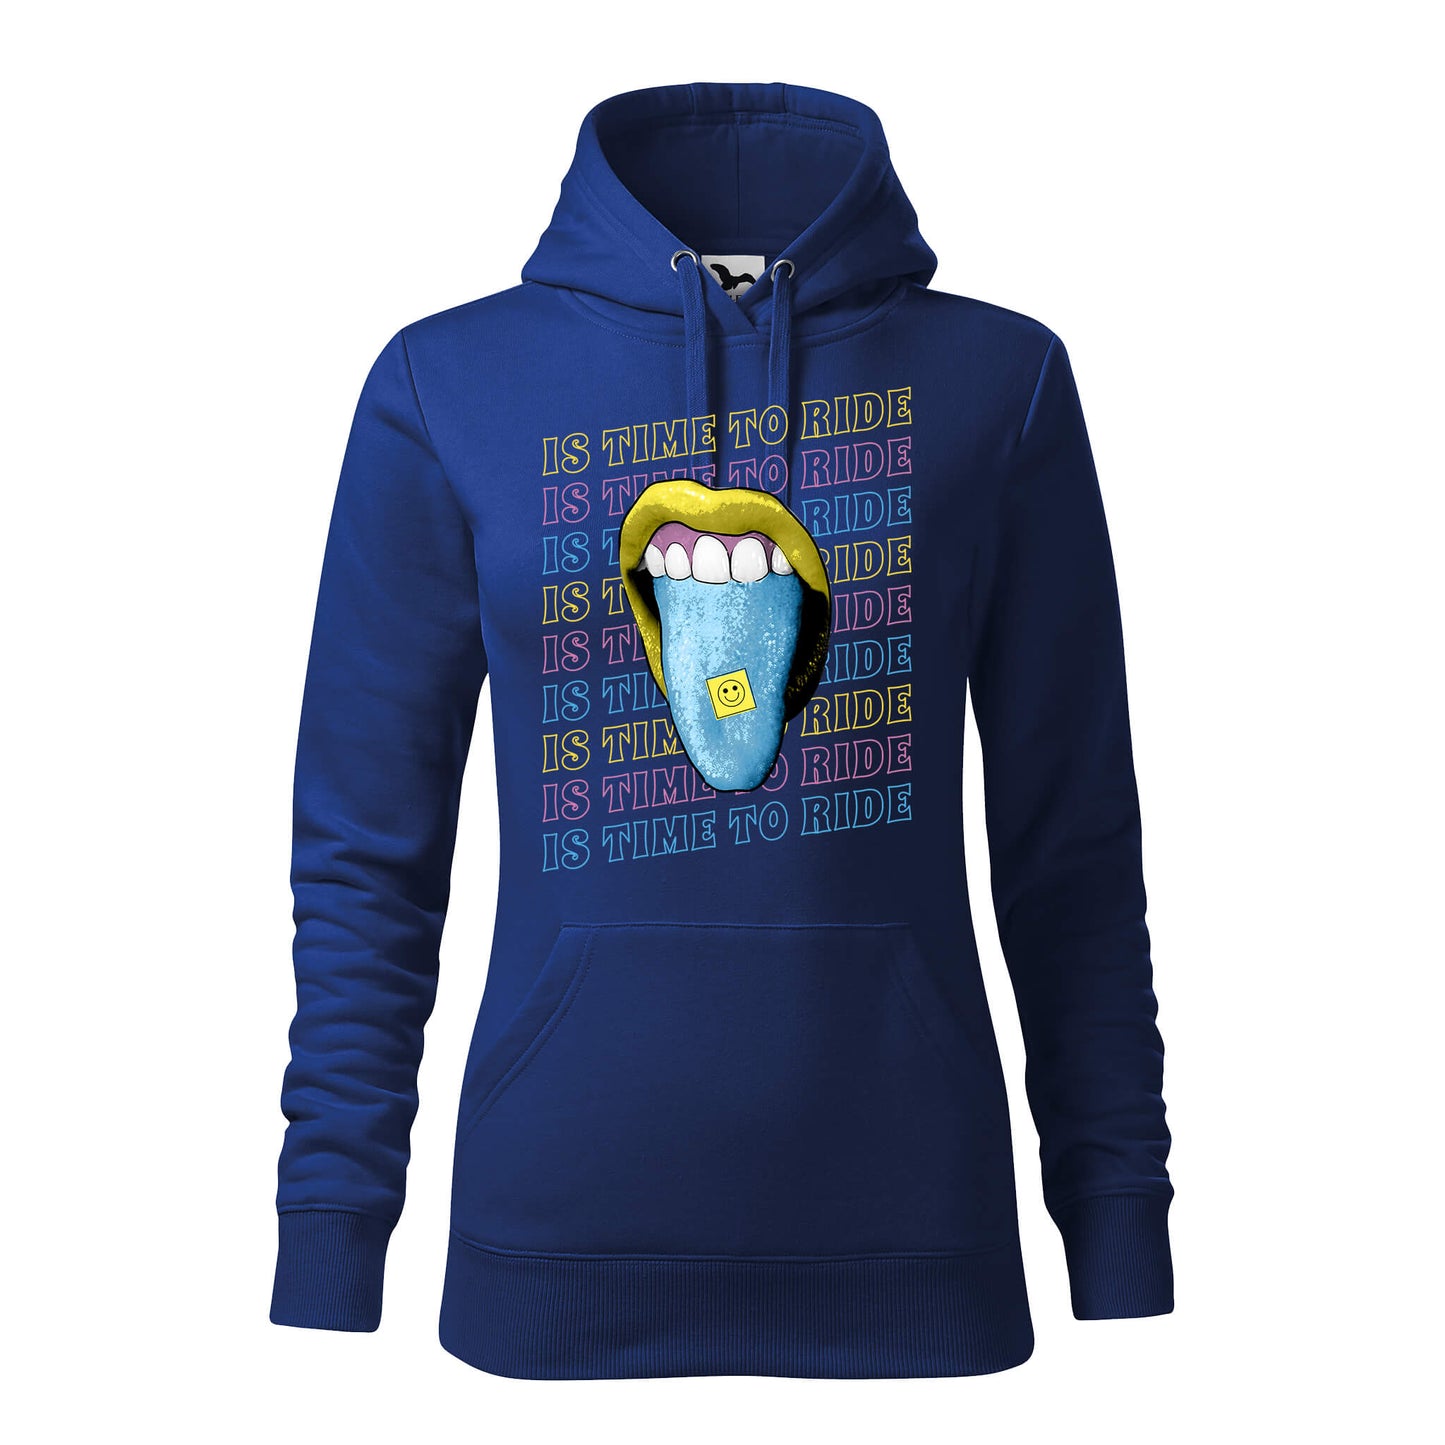 Its time to ride lsd hoodie - rvdesignprint